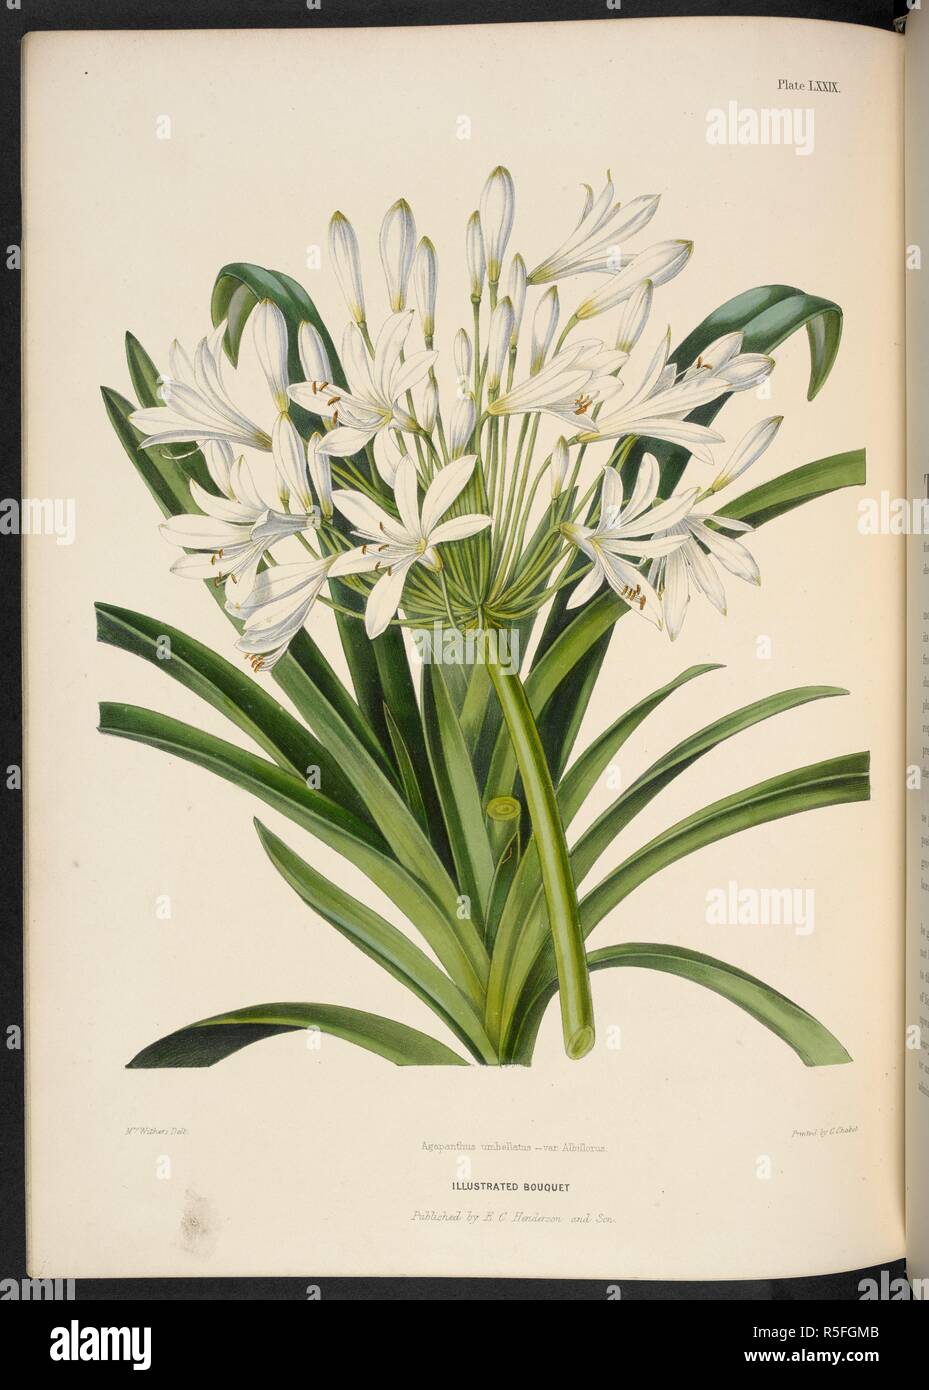 Agapanthus Umbellatus Albiflorus. . The Illustrated Bouquet, consisting of figures, with descriptions of new flowers. London, 1857-64. Source: 1823.c.13 plate 79. Author: Henderson, Edward George. Withers, Mrs. Stock Photo